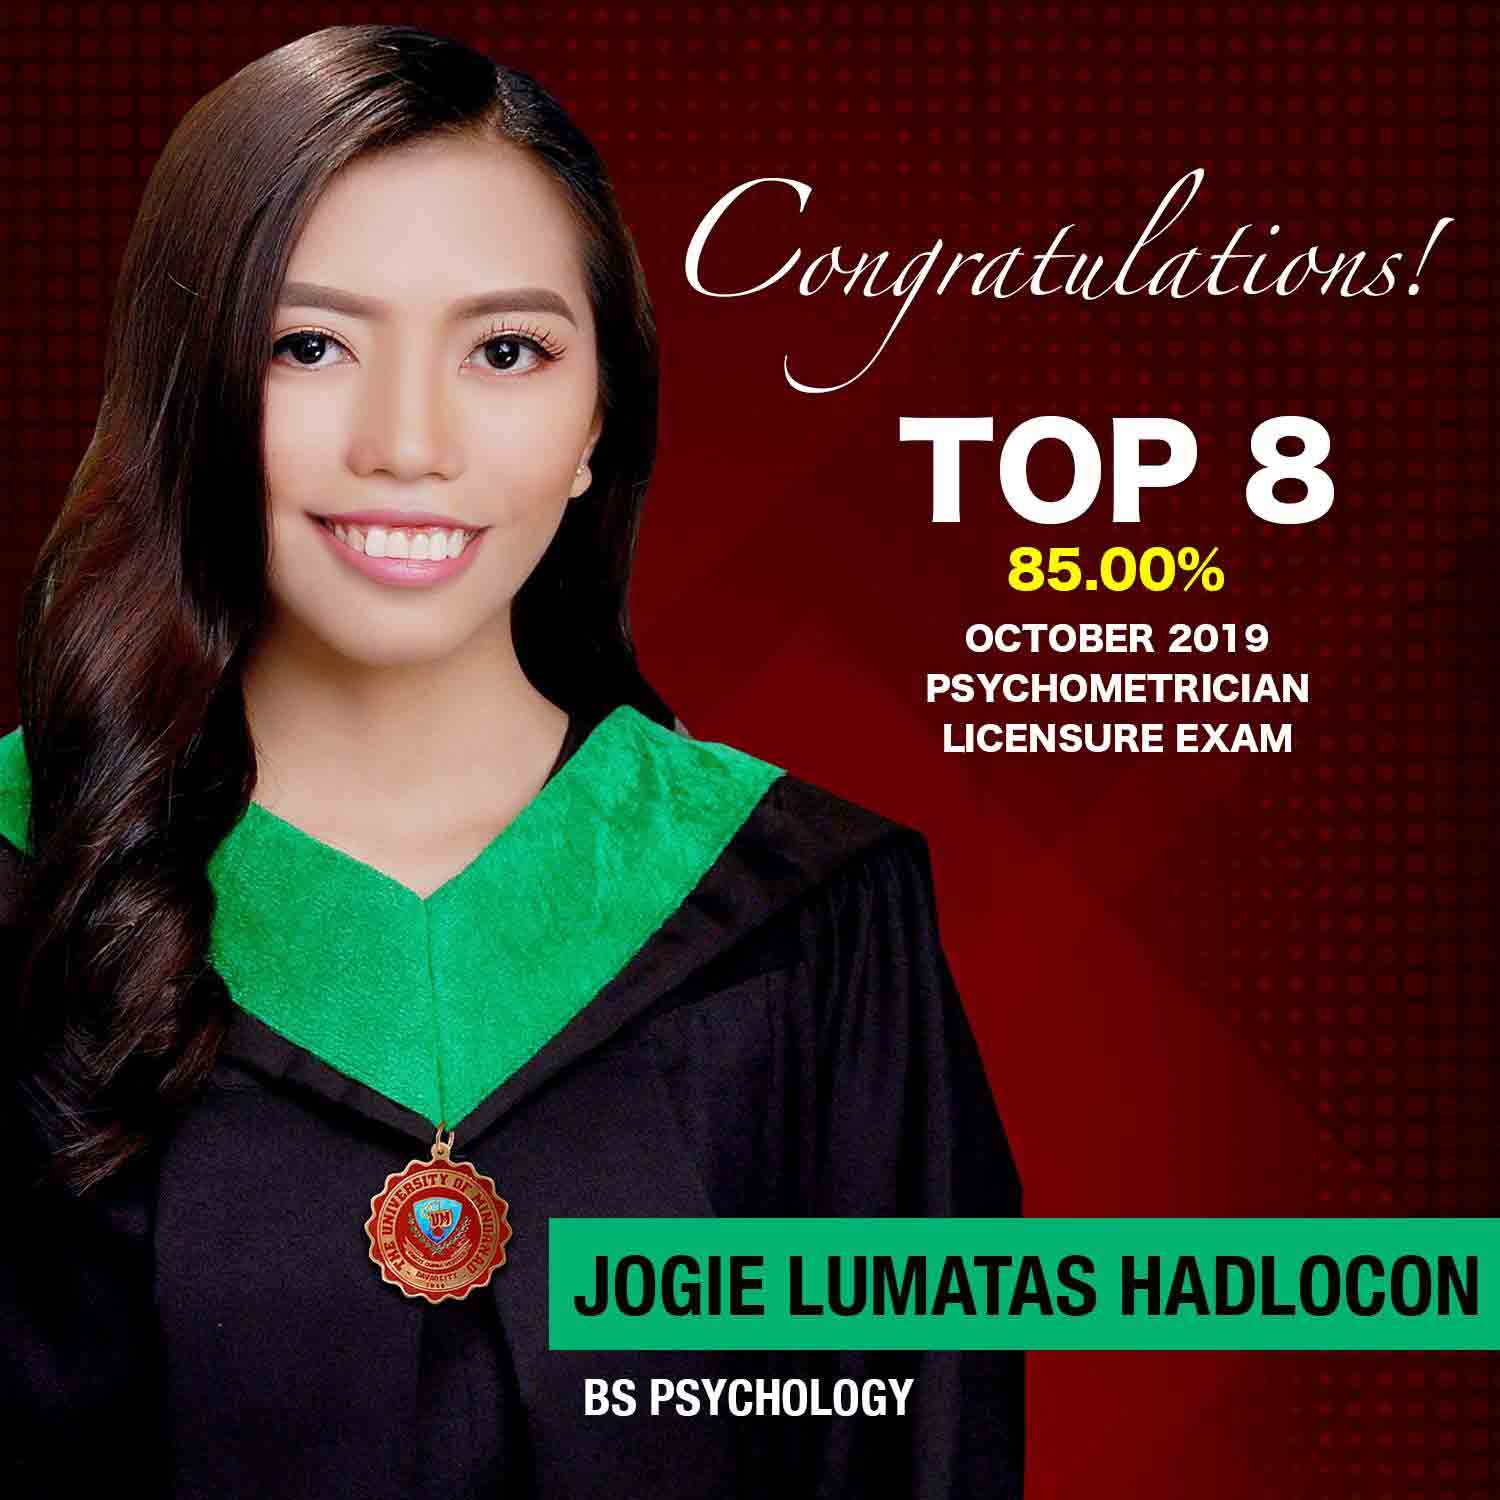 UM has top placer in October 2019 Psychometrician Licensure Examination